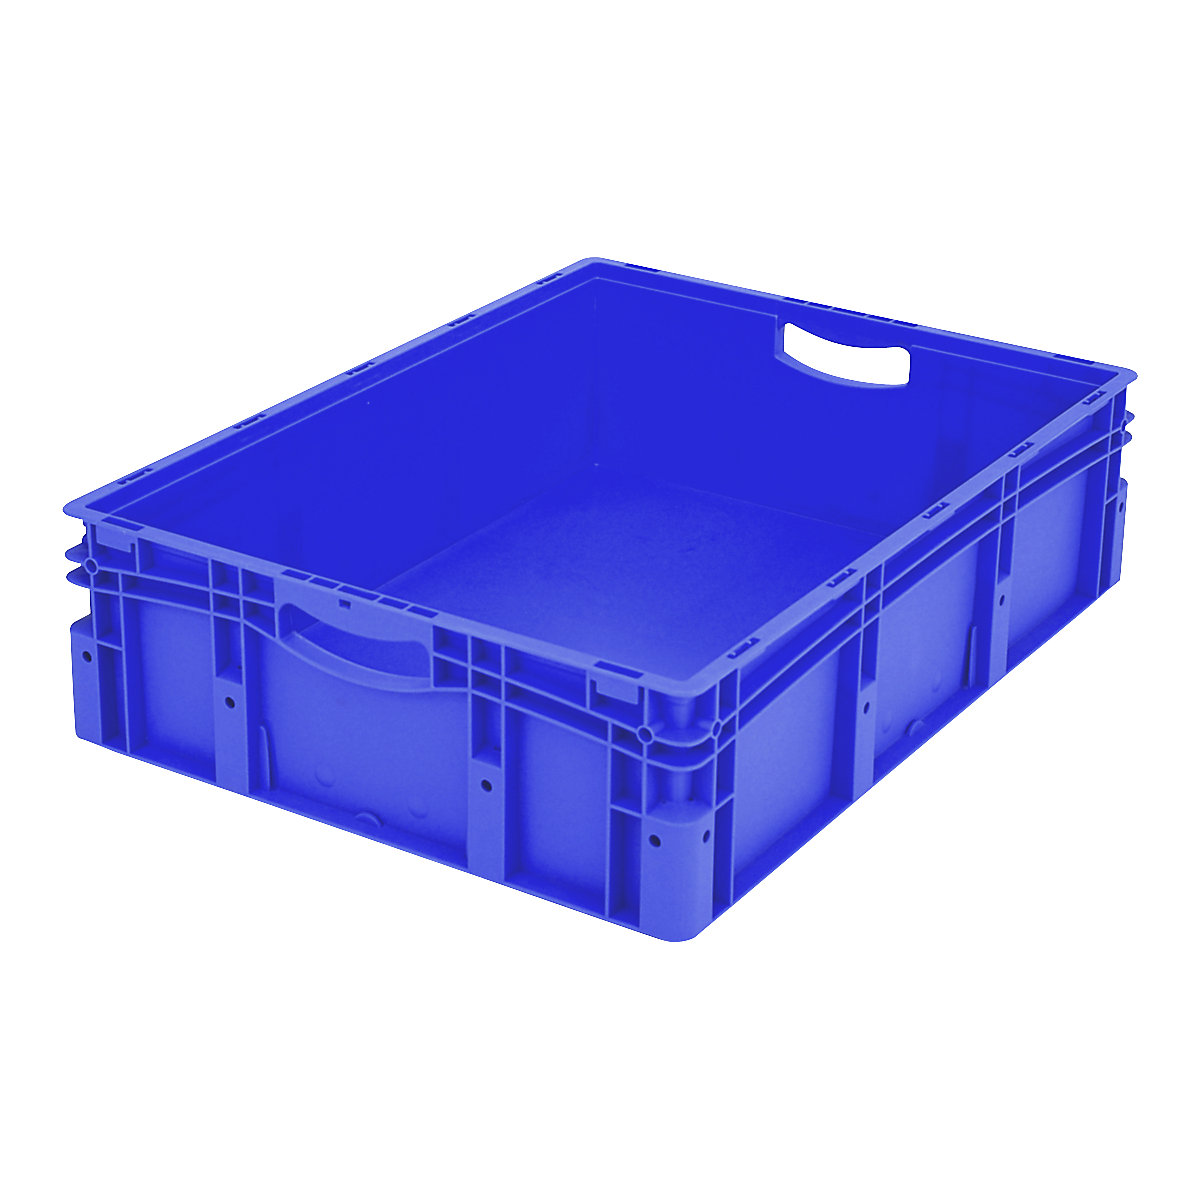 XL Euro stacking container – BITO, standard model, LxWxH 800 x 600 x 220 mm-2